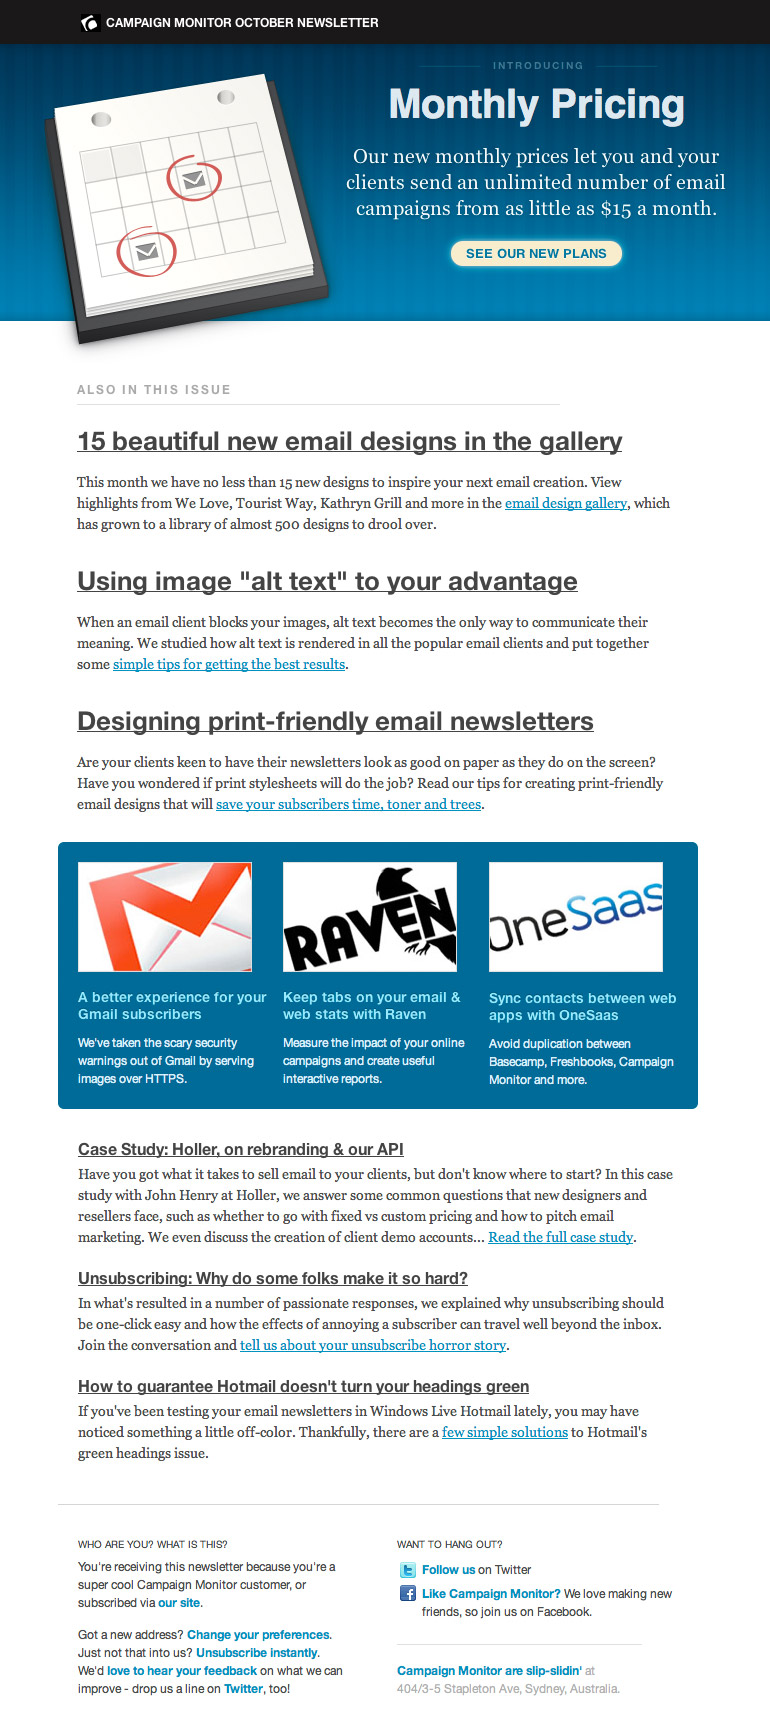 Campaign Monitor Newsletter 2010